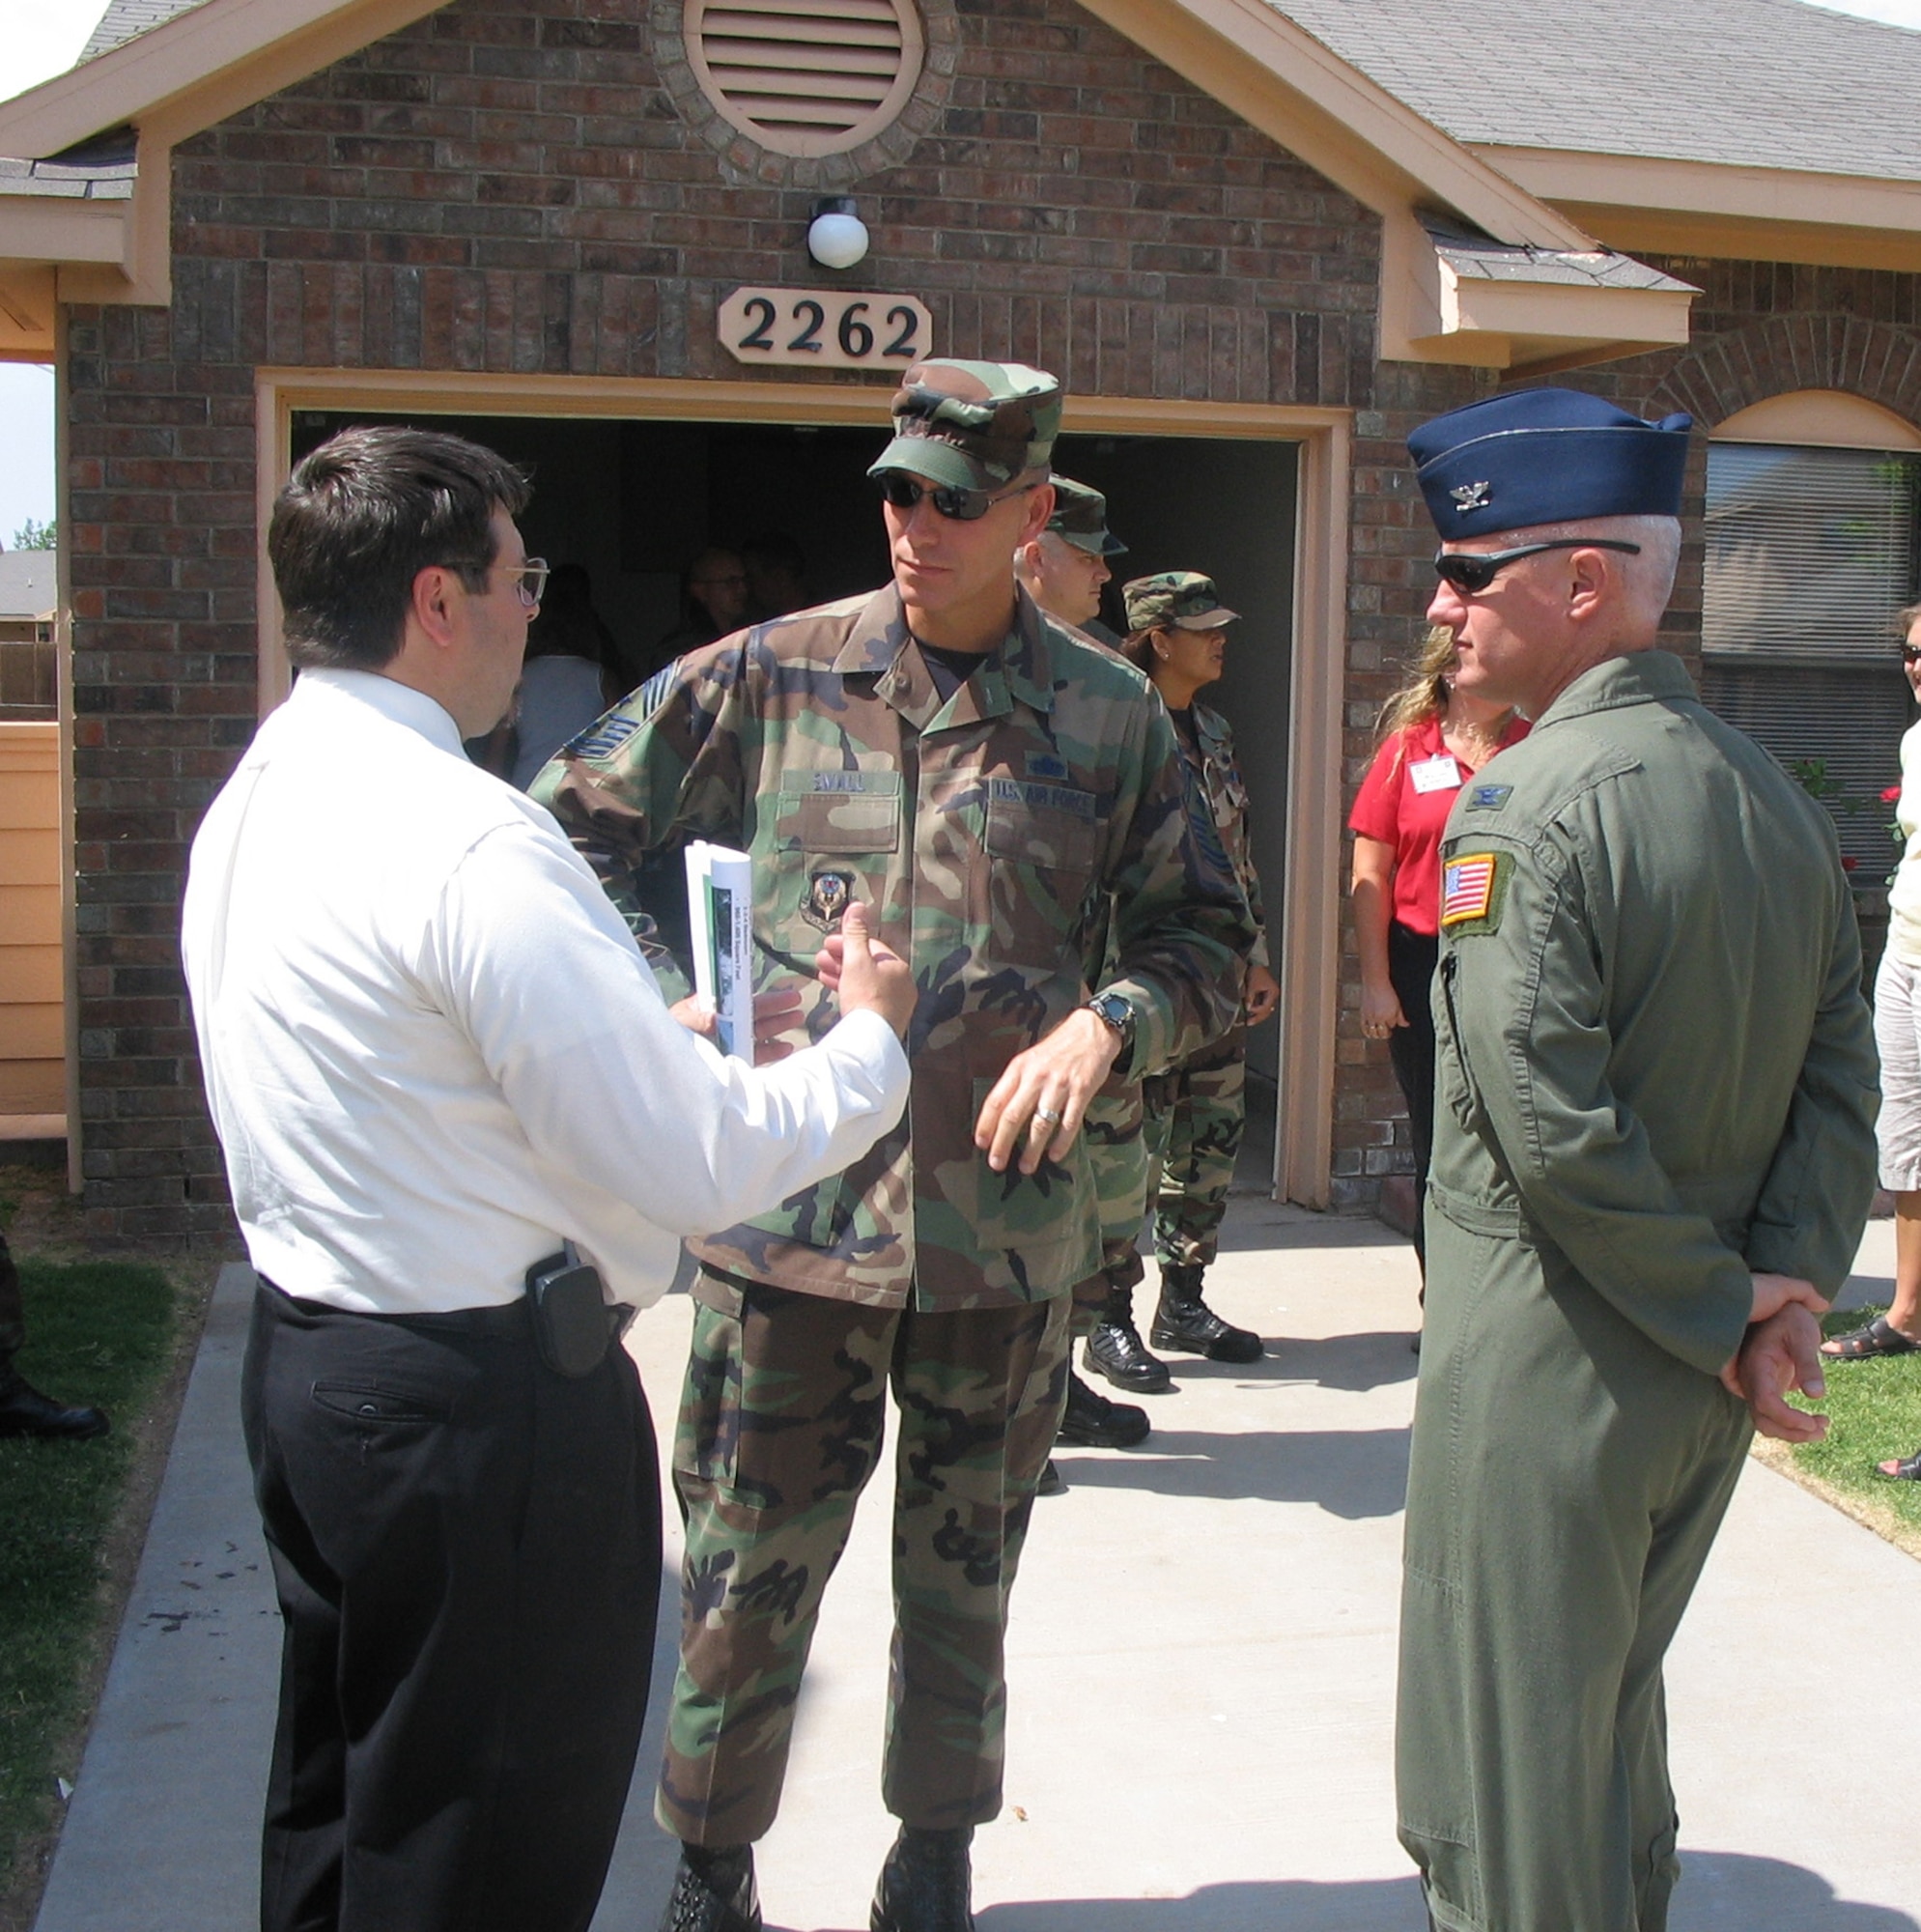 Tim Farmer (left), 27th Civil Engineering Squadron housing officer, discusses base housing with Chief Master Sgt. Todd Small, 16th Special Operations Wing command chief, and Col. Norman Brozenick Jr., 16th SOW commander, at the Cannon Meadows, housing subdivision in neighboring Portales, N.M., during the group's visit.  (U.S. Air Force Photograph by Lt. Amy Cooper)